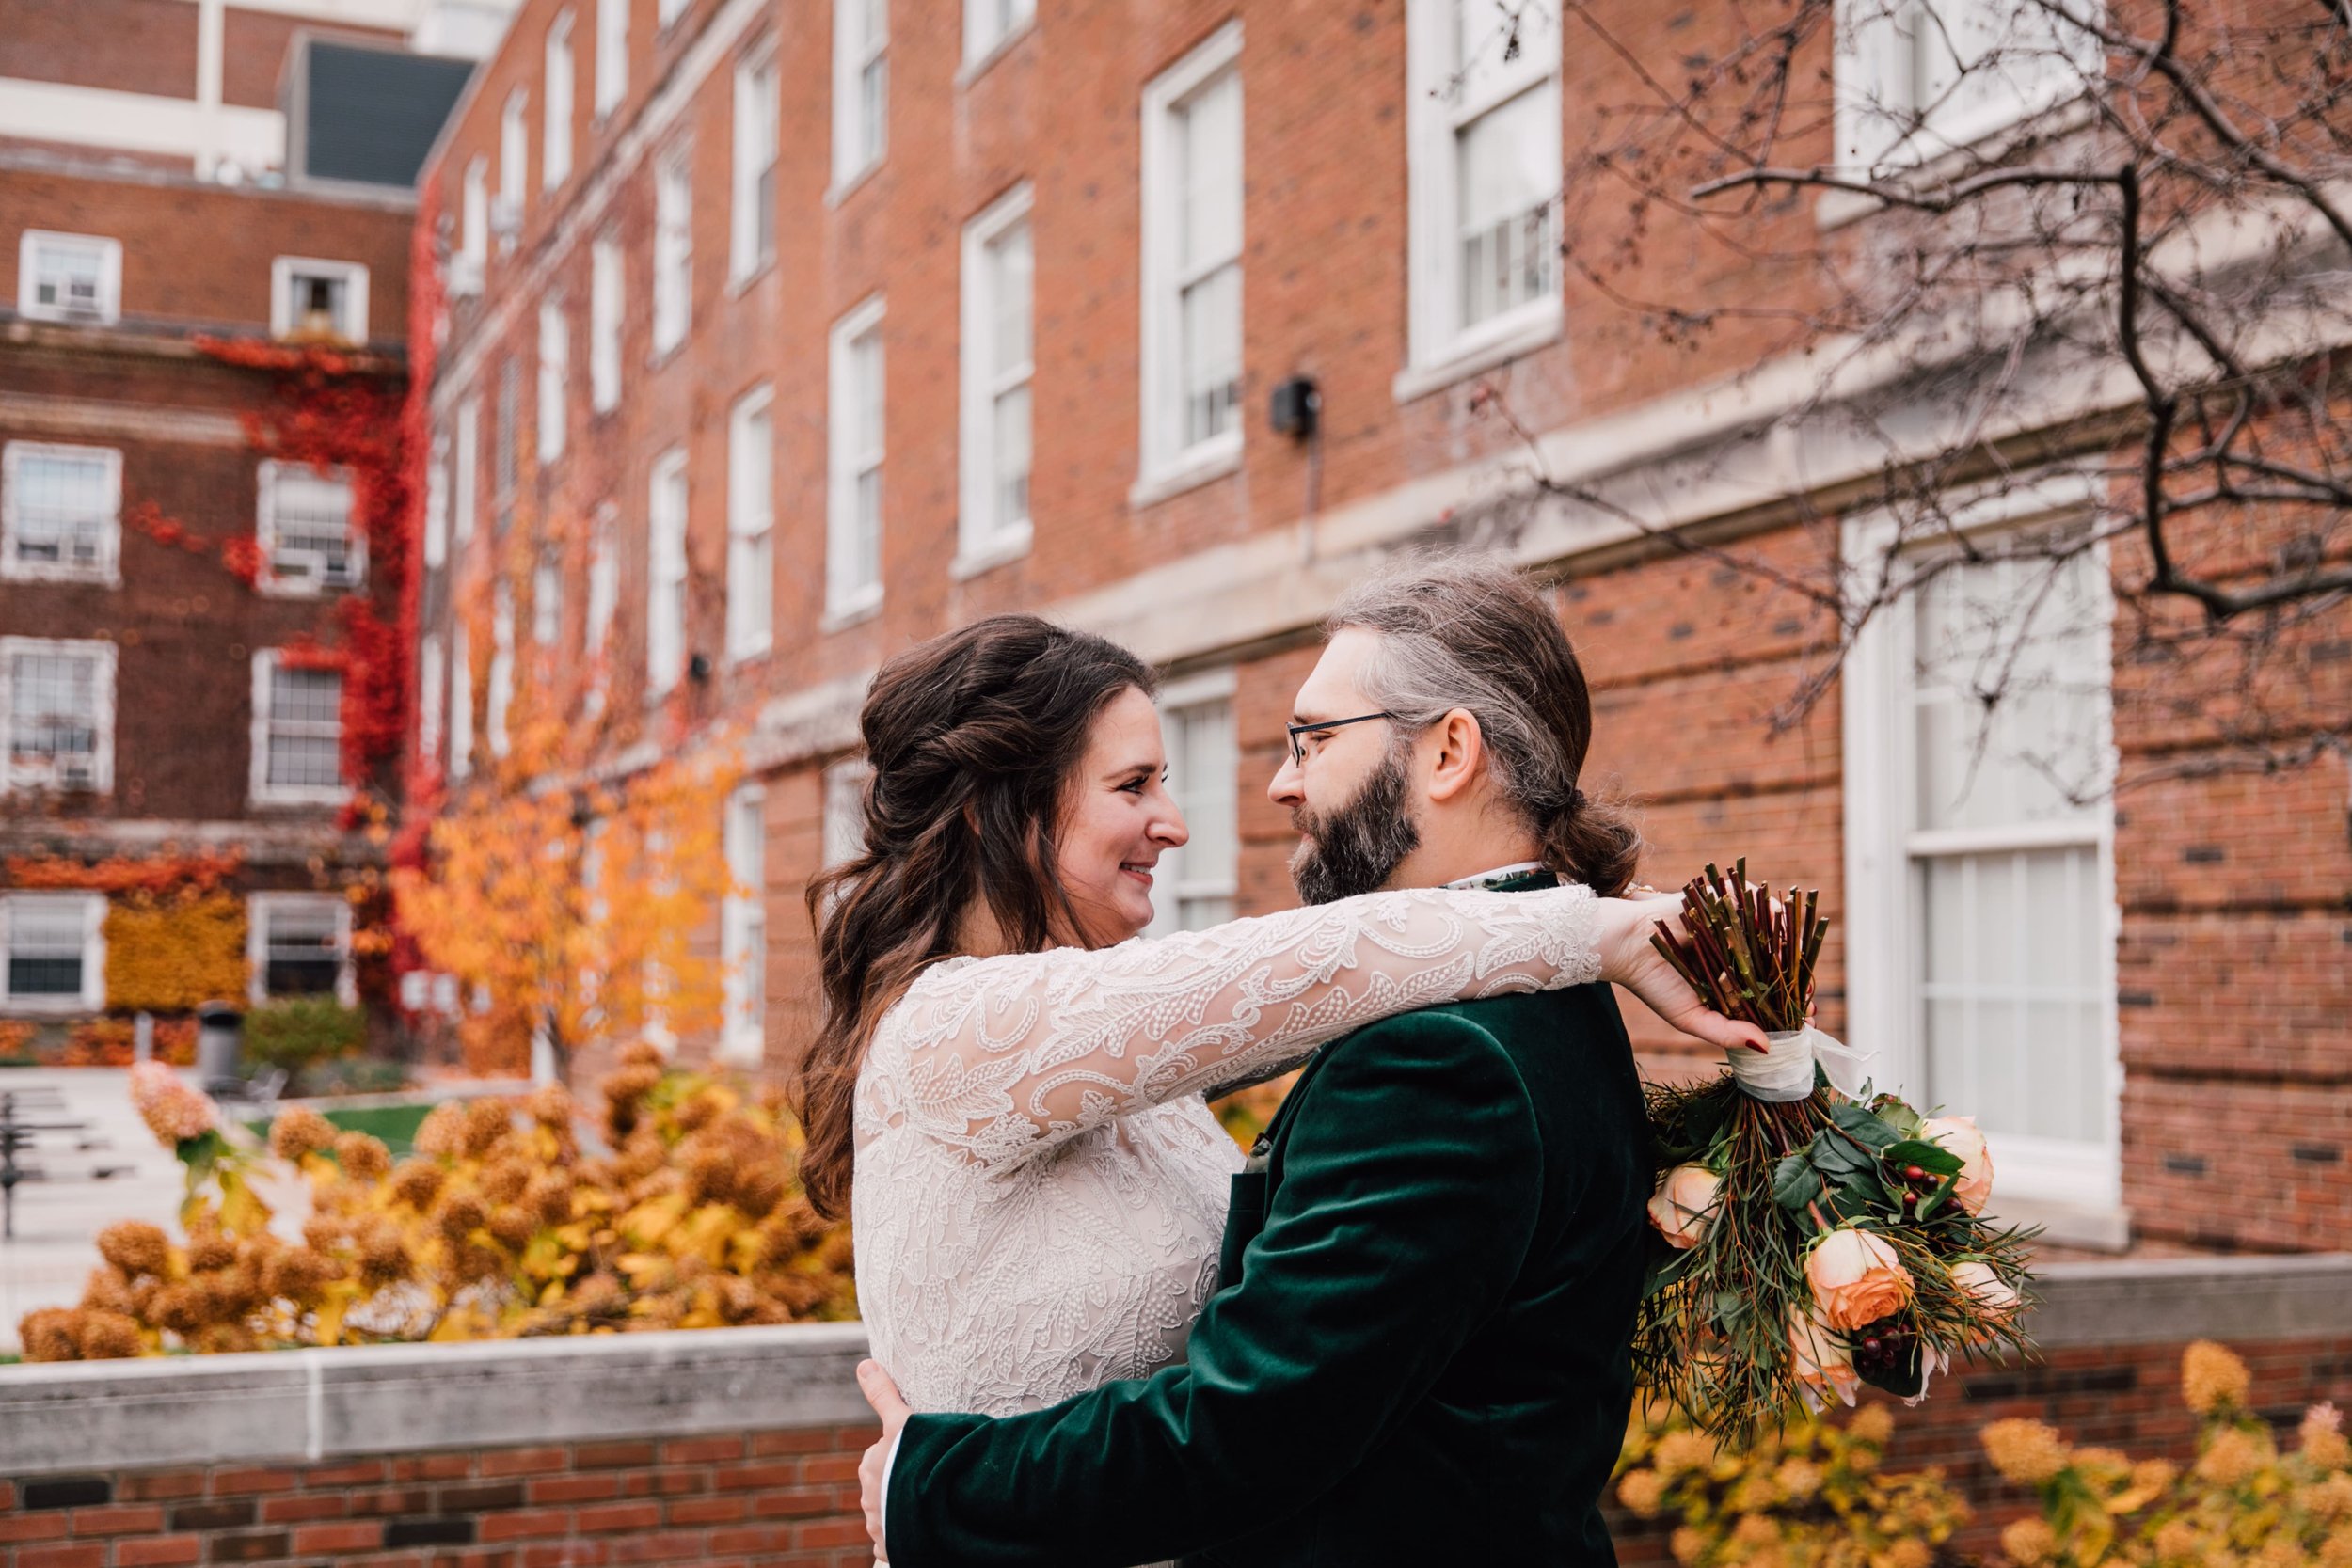  syracuse ny wedding photographer captures a couple gazing at each other, the bride rests her arms on the groom shoulder with her fall bouquet upside down in her hand 